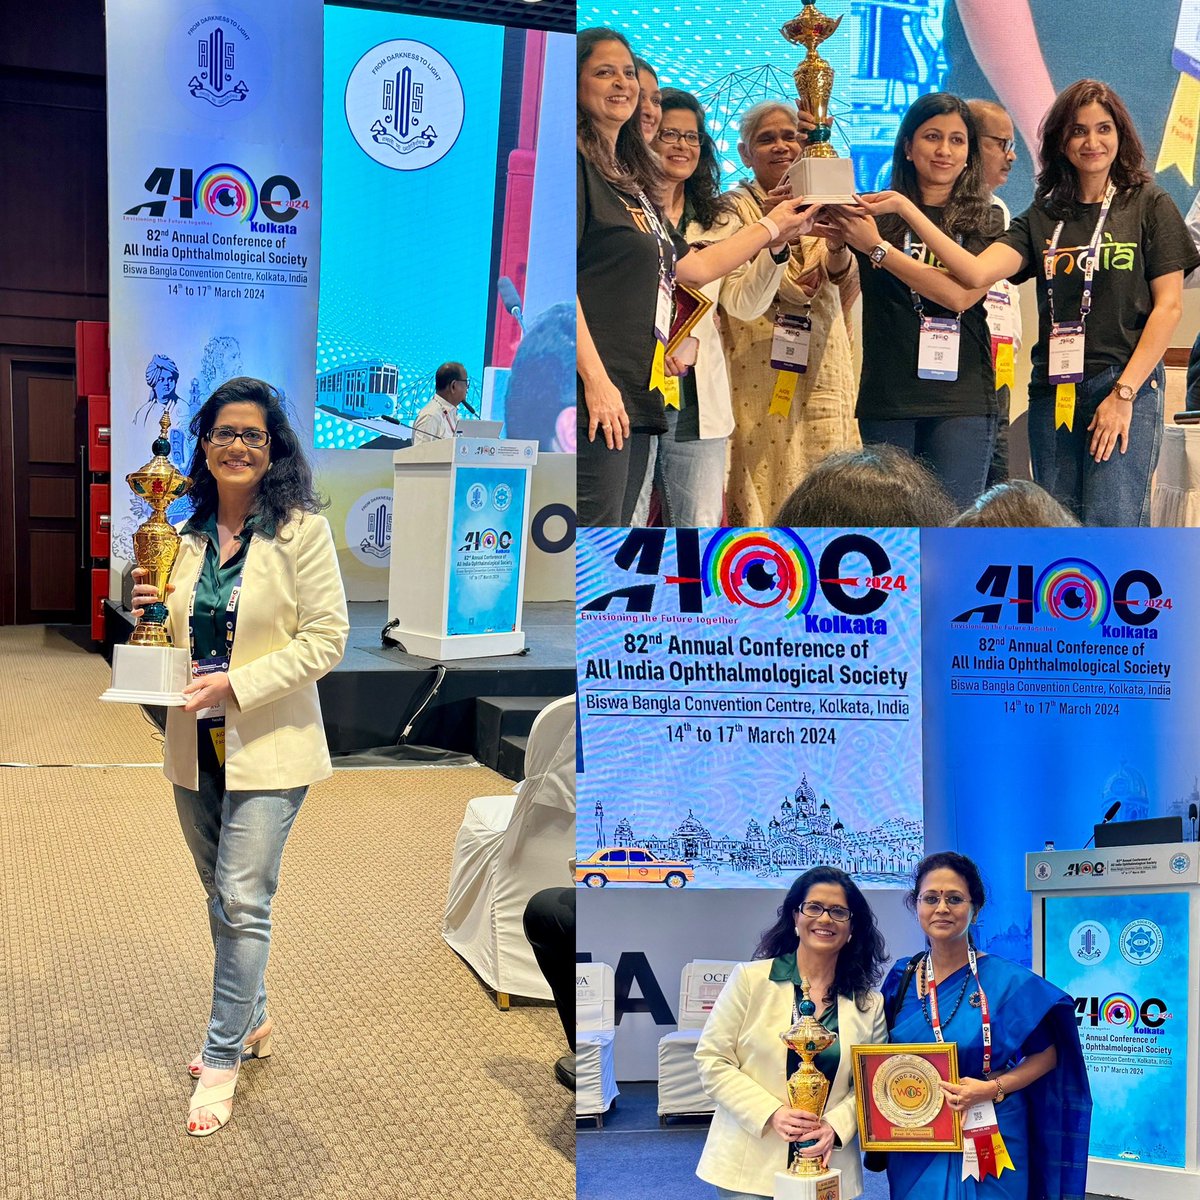 We won the national competitive session of management of complicated cases at WOS-All India Ophthalmic Conference at Kolkata.The session also had a mentor mentee Role Play to be enacted by each state team where our team chose to highlight mental health issues in young medicos